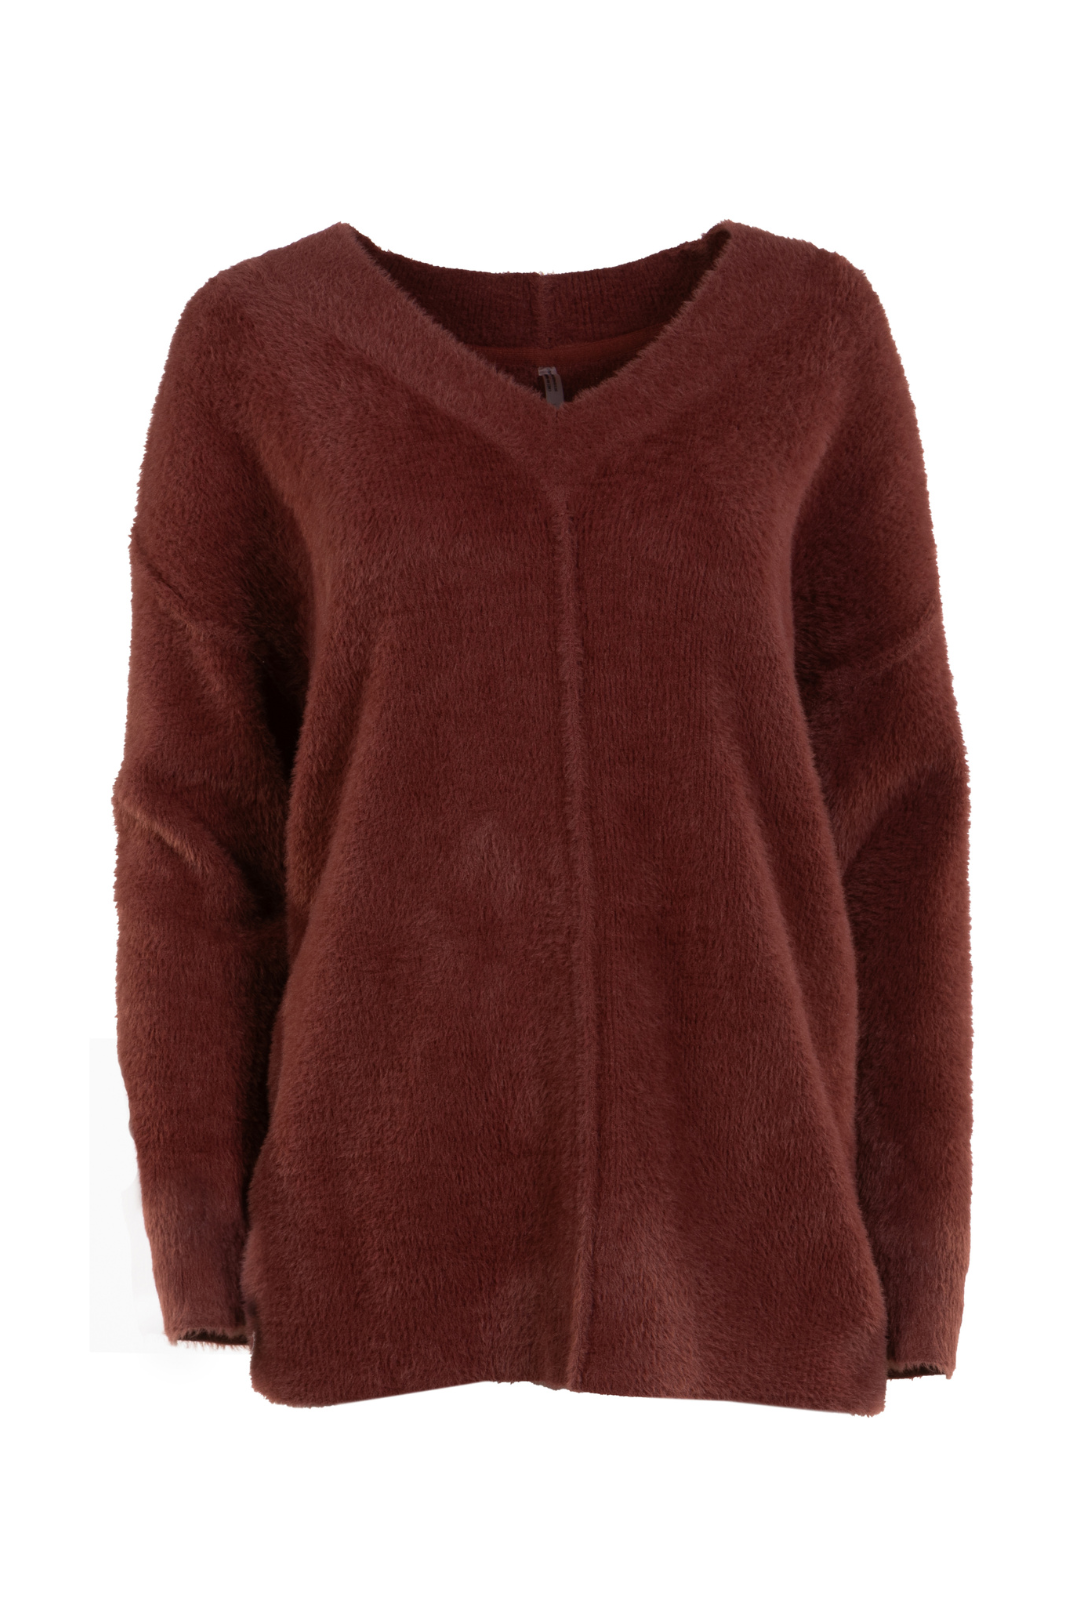 Wine Red Knit Sweater | Led